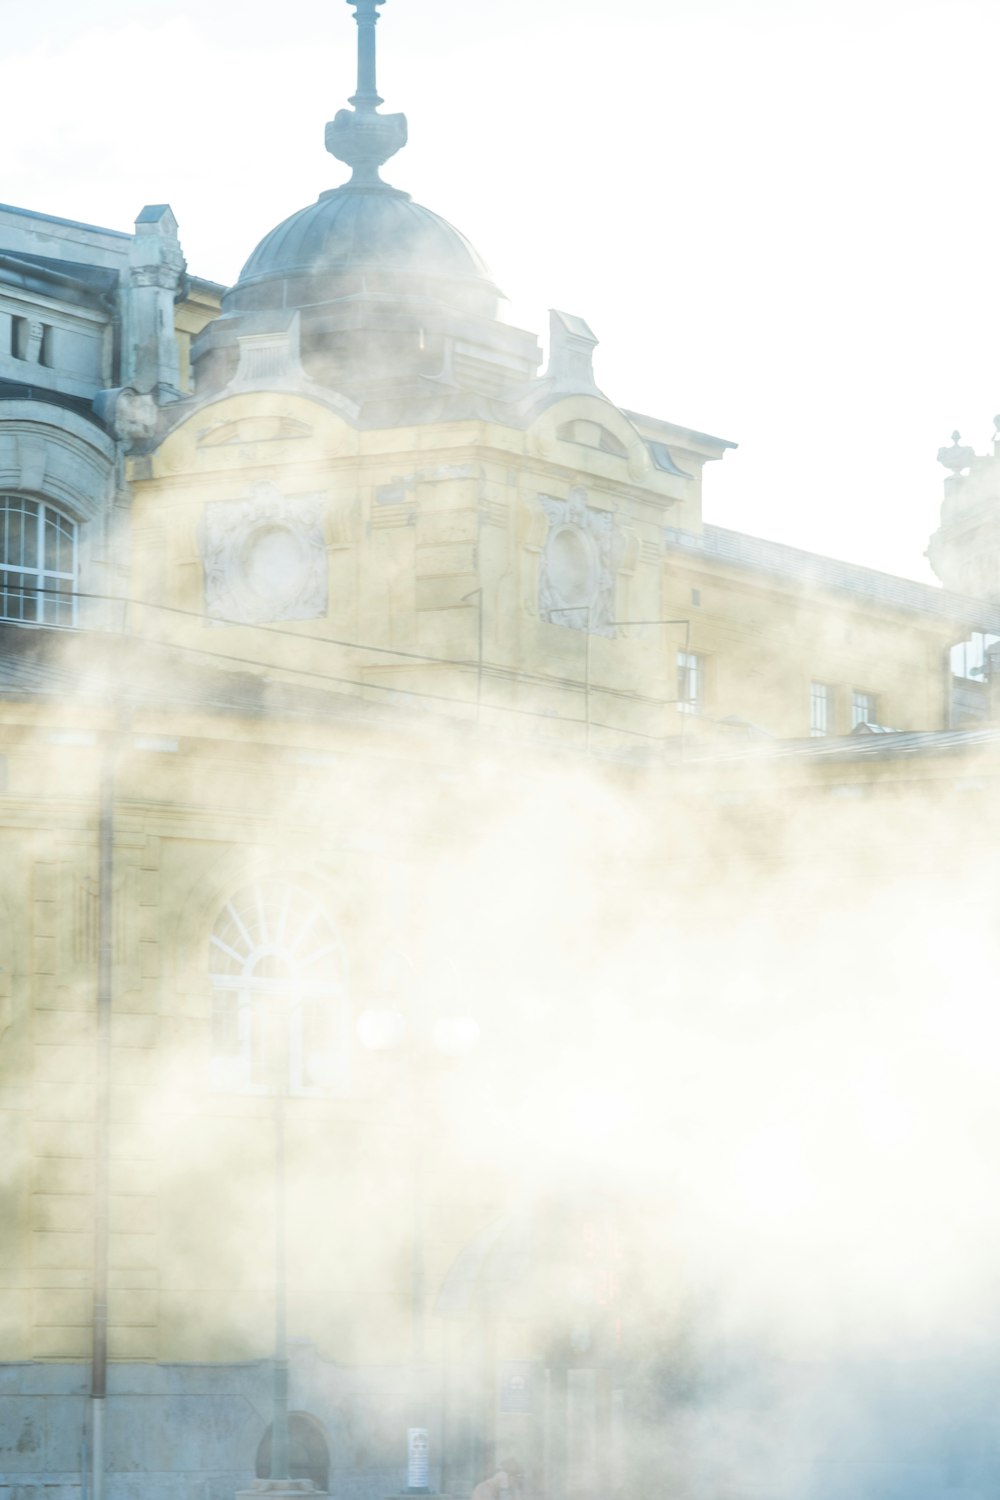 steam rises from the ground in front of a building